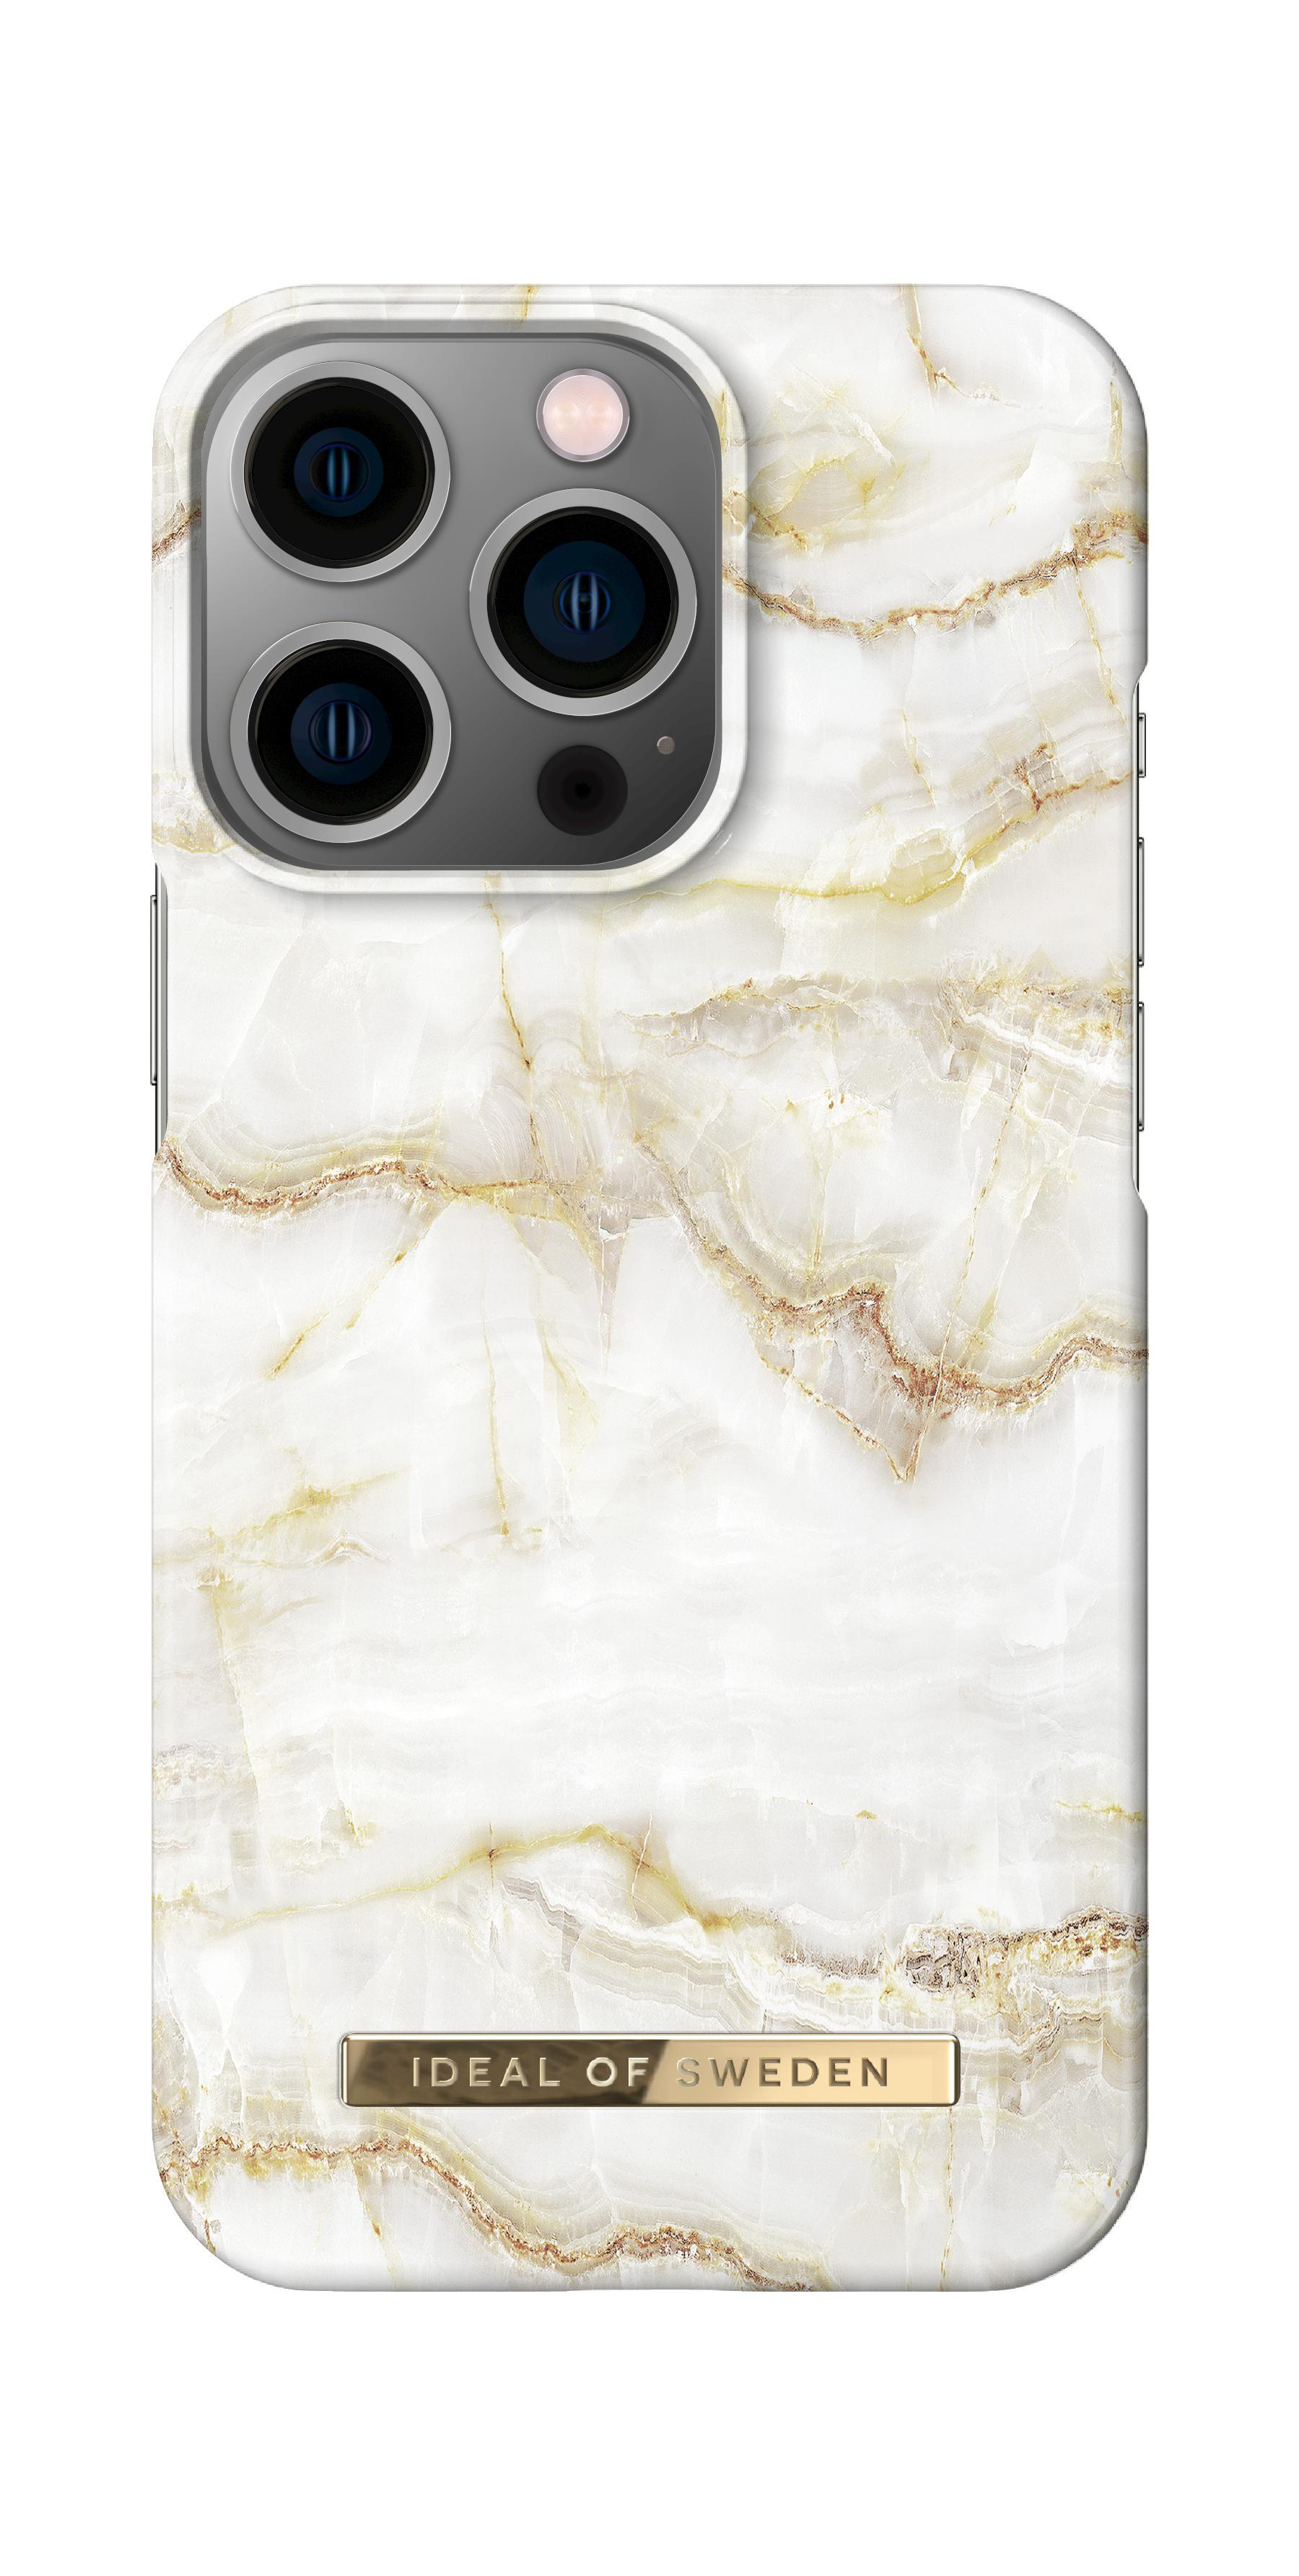 Backcover, 13 SWEDEN Glolden IDEAL Pearl Apple, iPhone Marble OF Pro, Fashion Case,